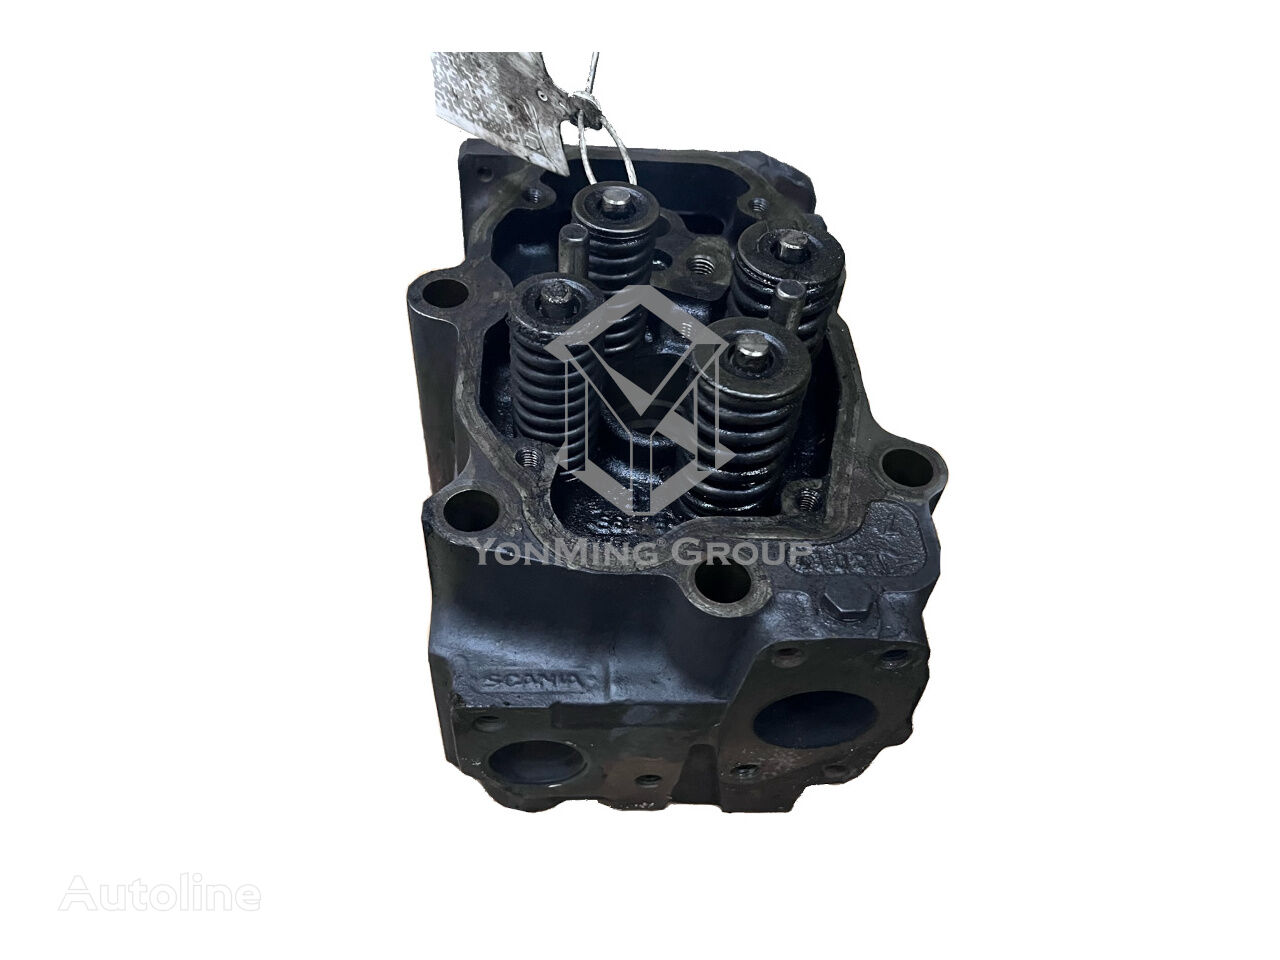 Scania 1846123 cylinder head for truck